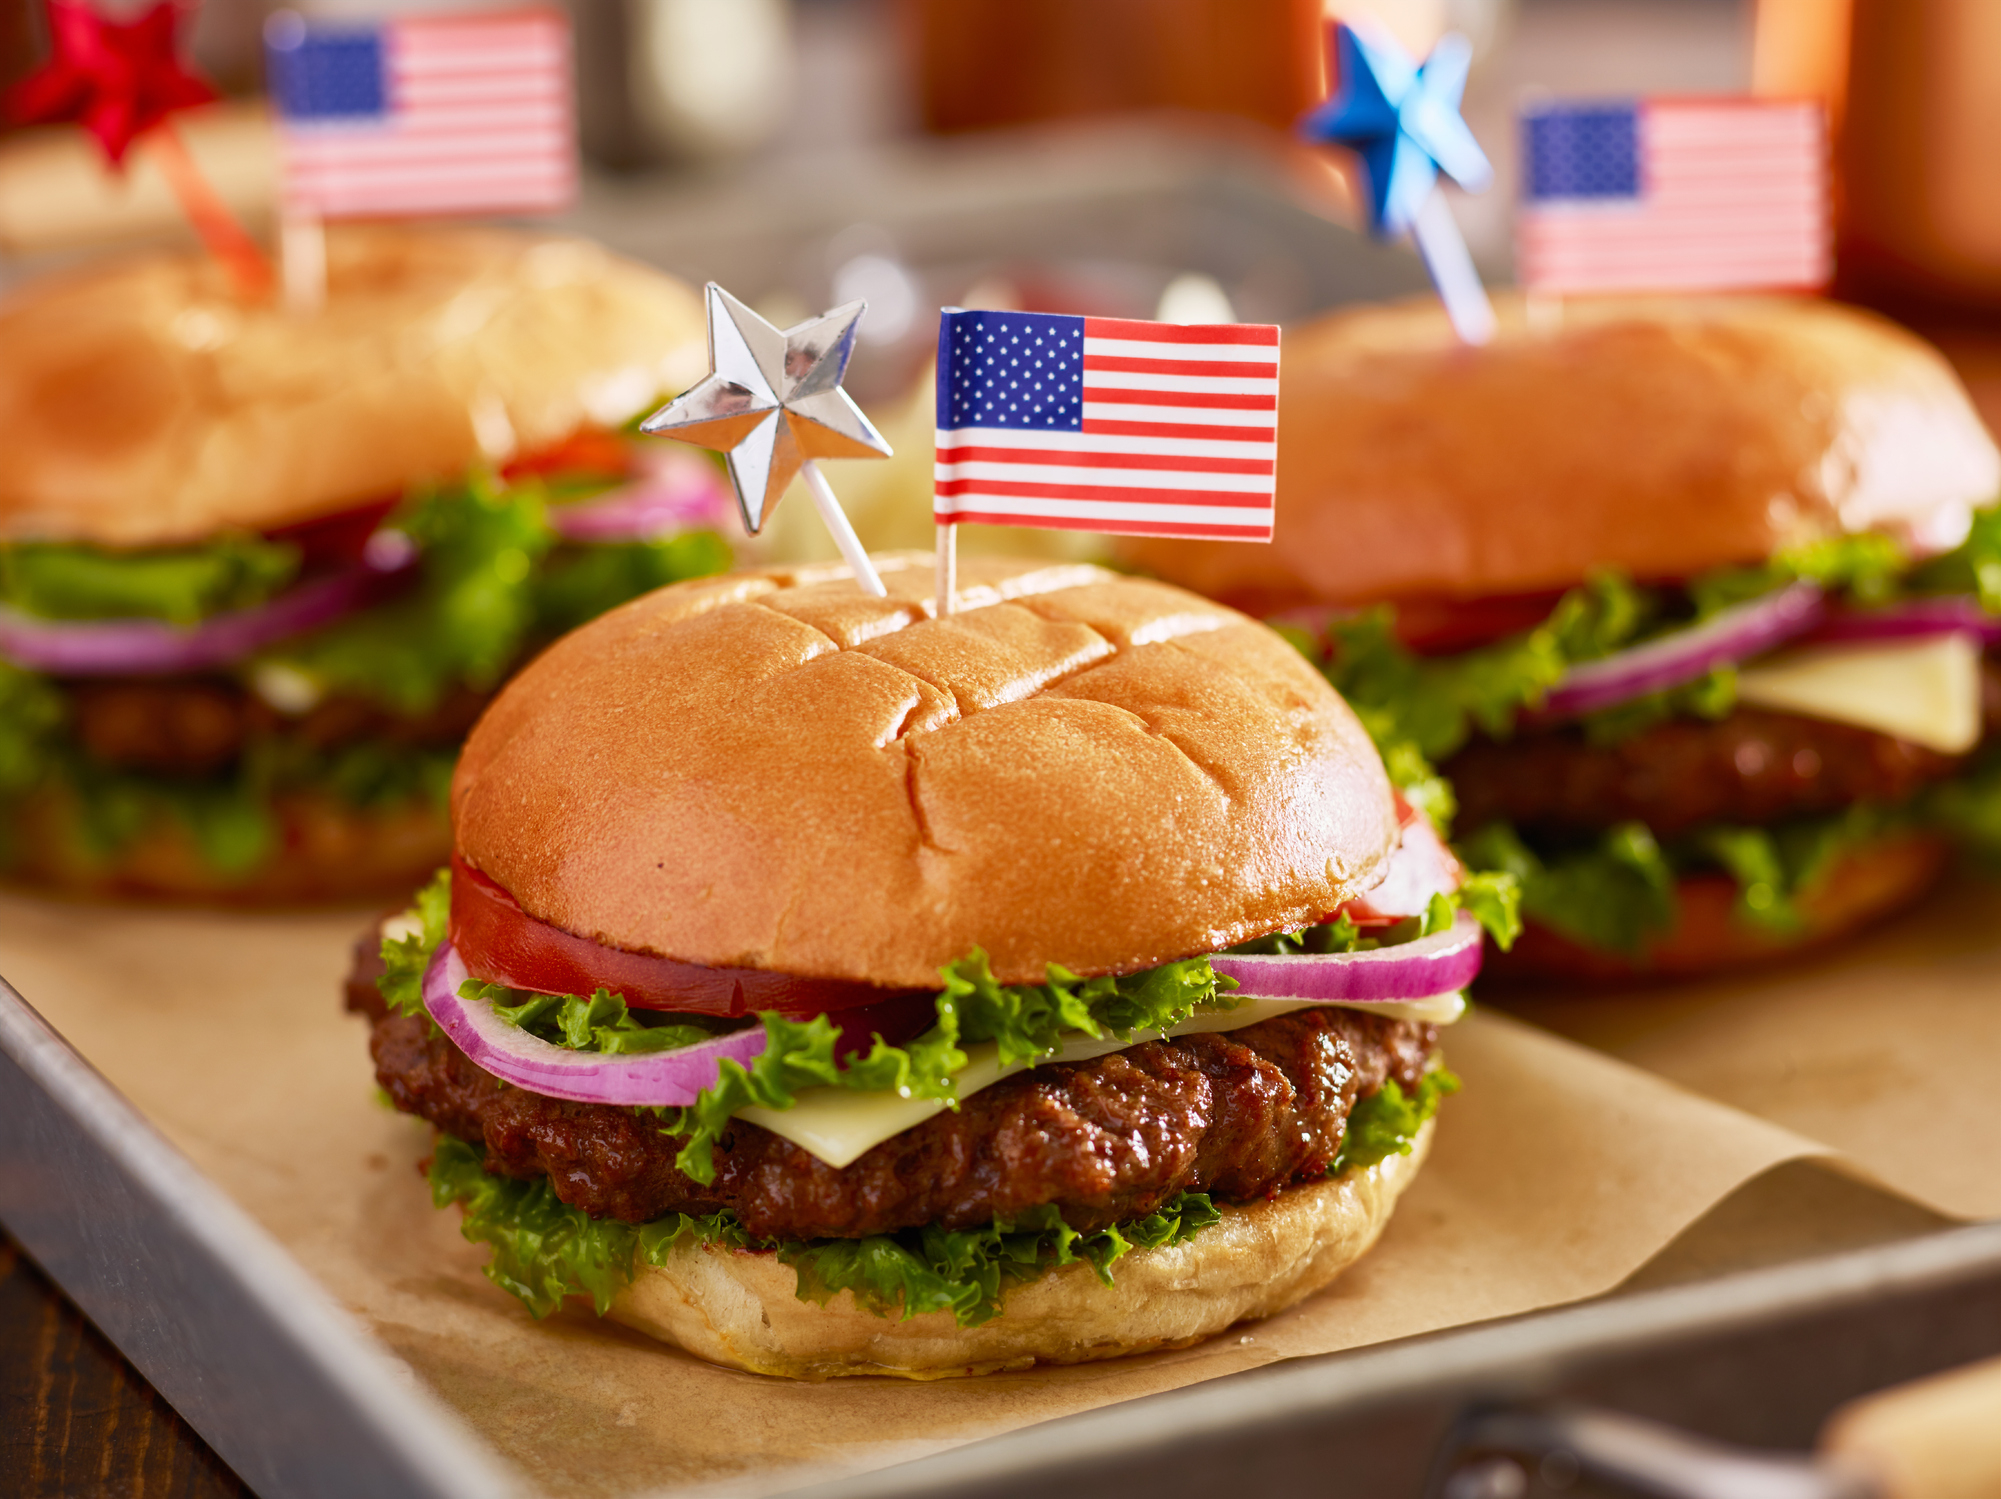 Three burgers decorated with American flags, served on a tray, in a patriotic presentation